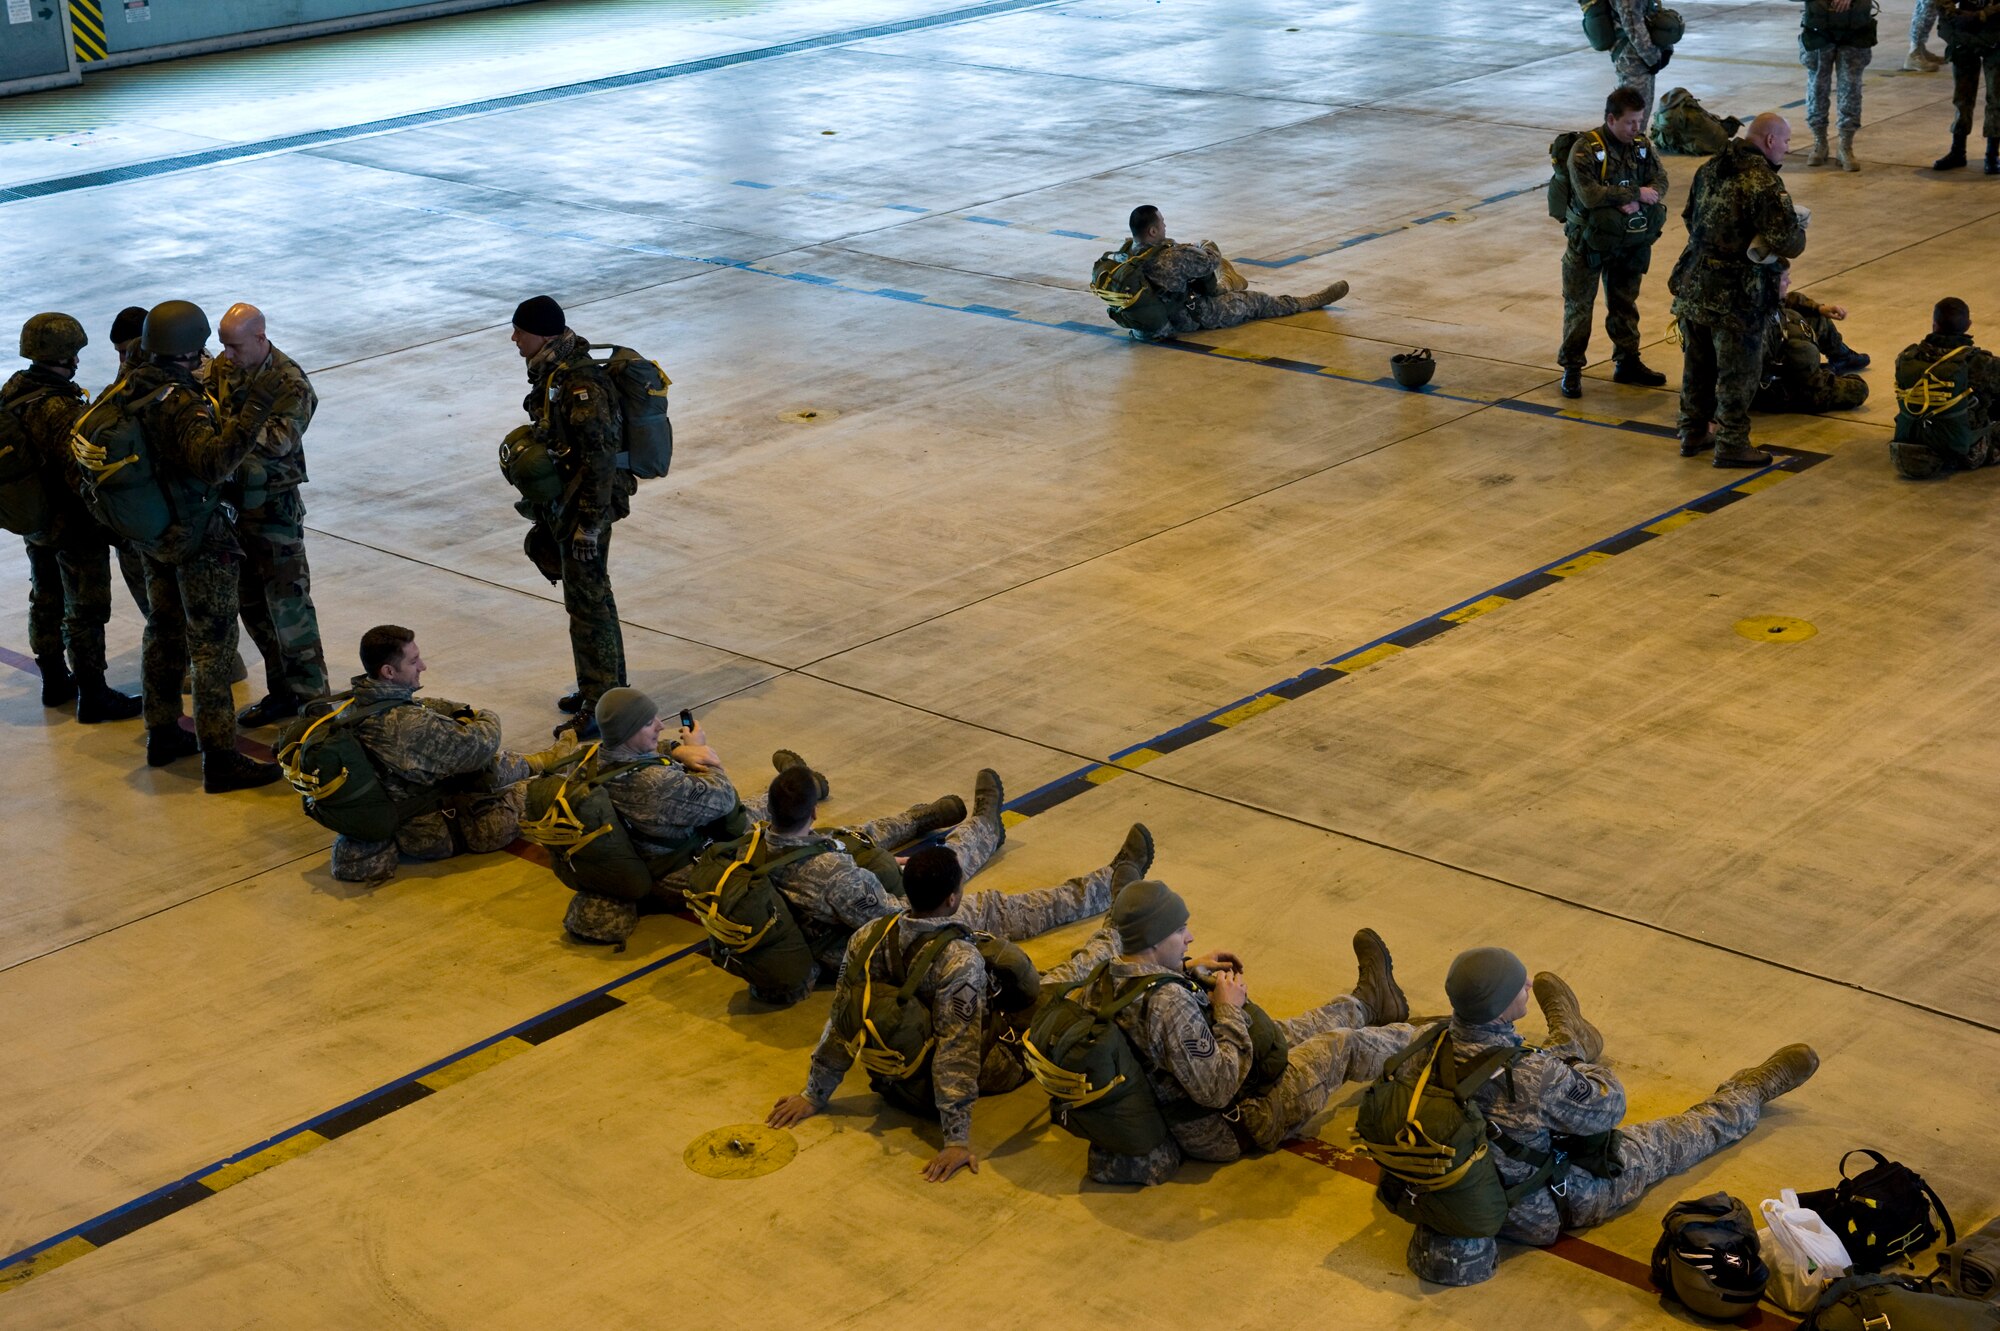 U.S. Army Soldiers, Air Force Airmen and German soldiers wait in a hanger before loading into a C-130J Hercules, from Ramstein Air Base, Germany, in preparation for a training airdrop mission at the Marnheim, Germany drop zone, Feb. 10, 2011. The single C-130J aircraft from the 37th Airlift Squadron, 86th Airlift Wing dropped more than fifty service members at the drop site.  (U.S. Air Force photo/TSgt Wayne Clark, AFNE Regional News Bureau) (Released)